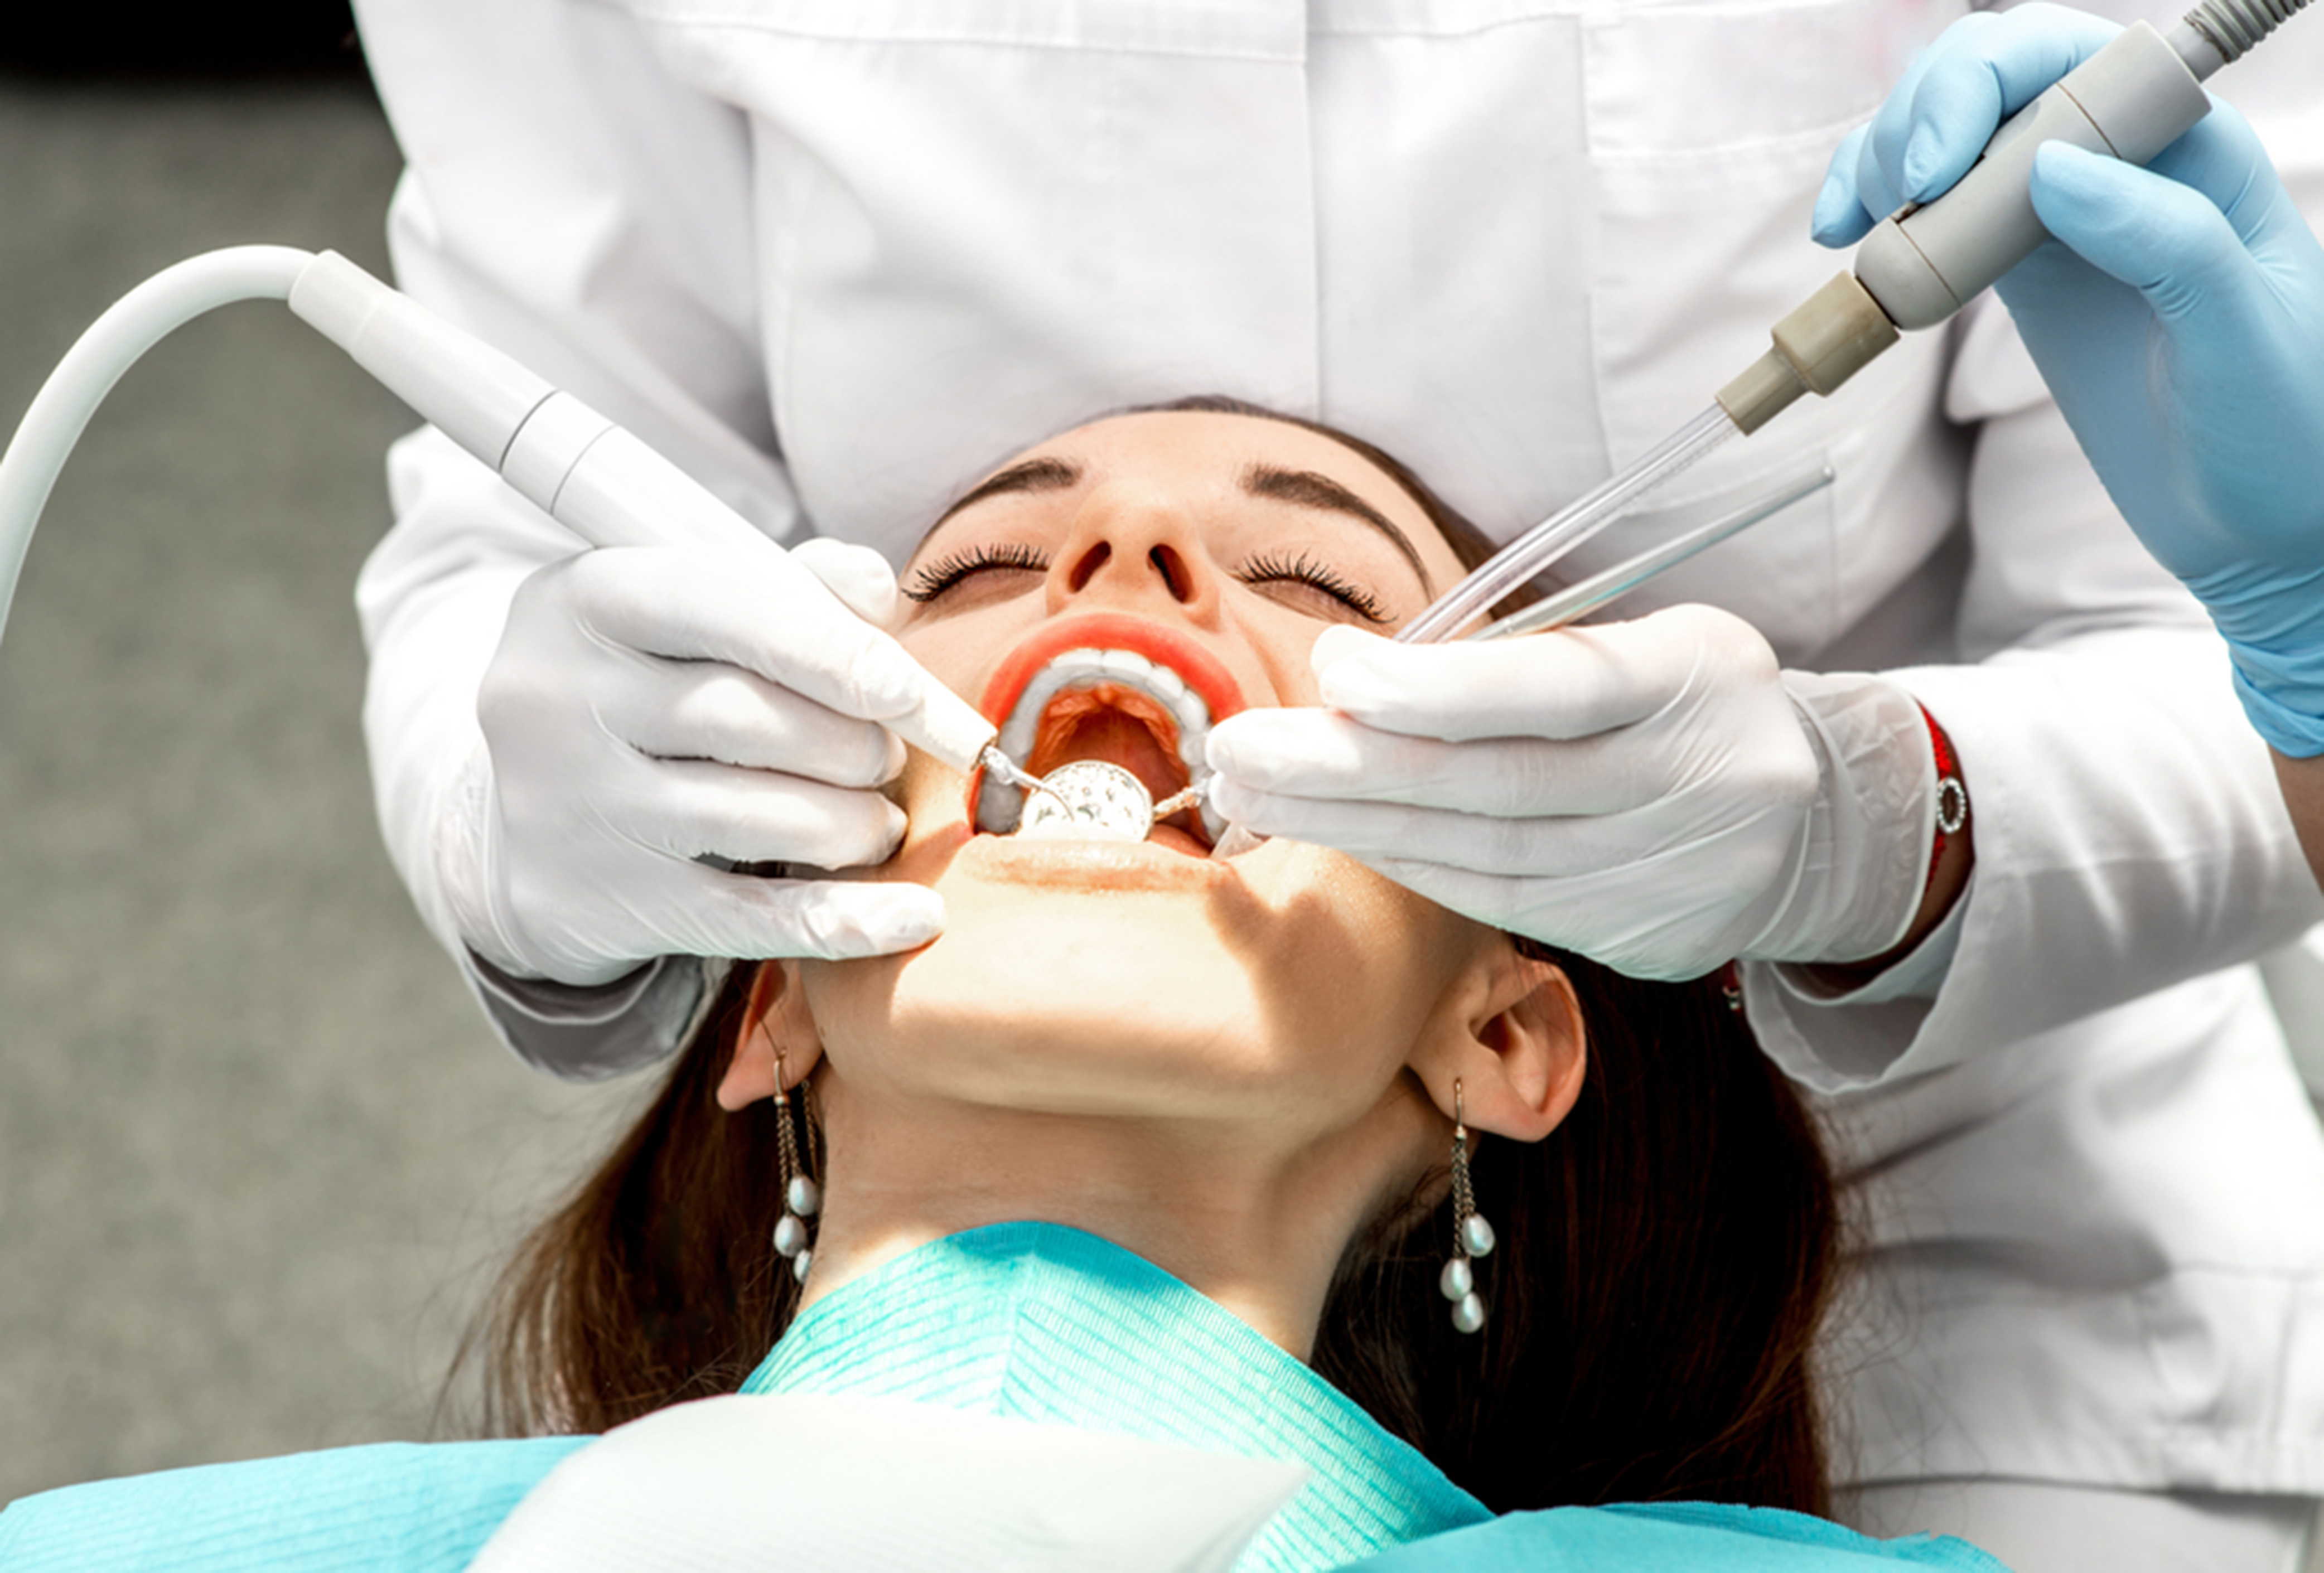 painless dental procedures are possible with sedation dentistry